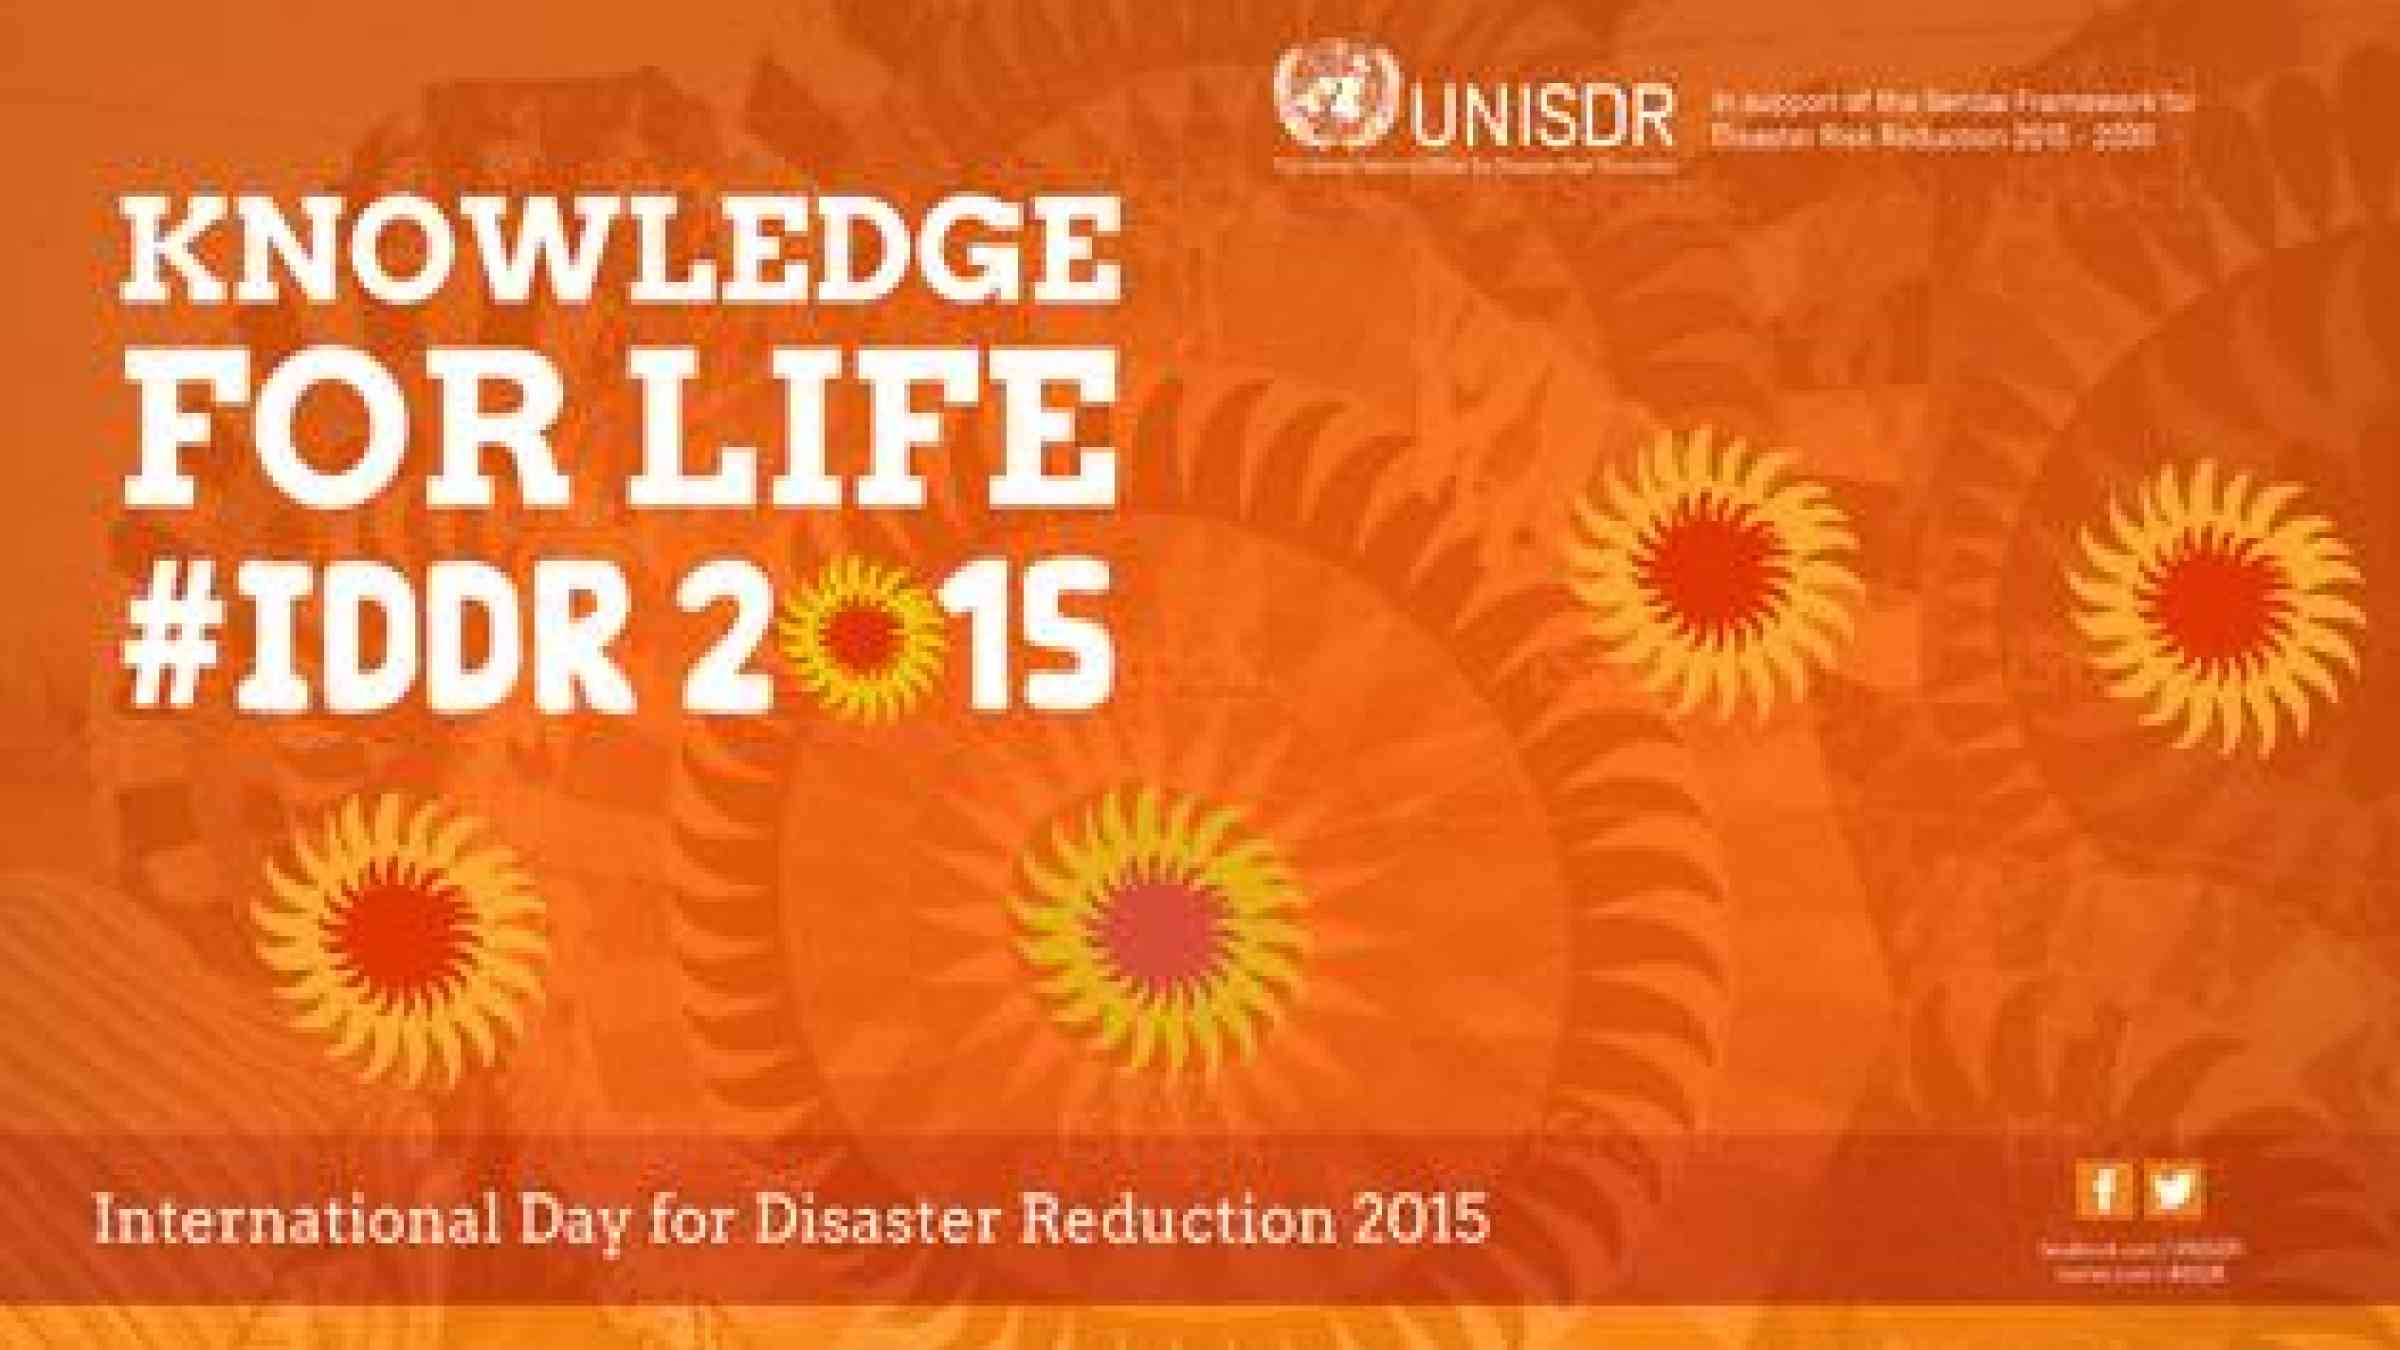 This year's International Day for Disaster Reduction highlights the value of traditional, indigenous and local knowledge in disaster risk reduction.